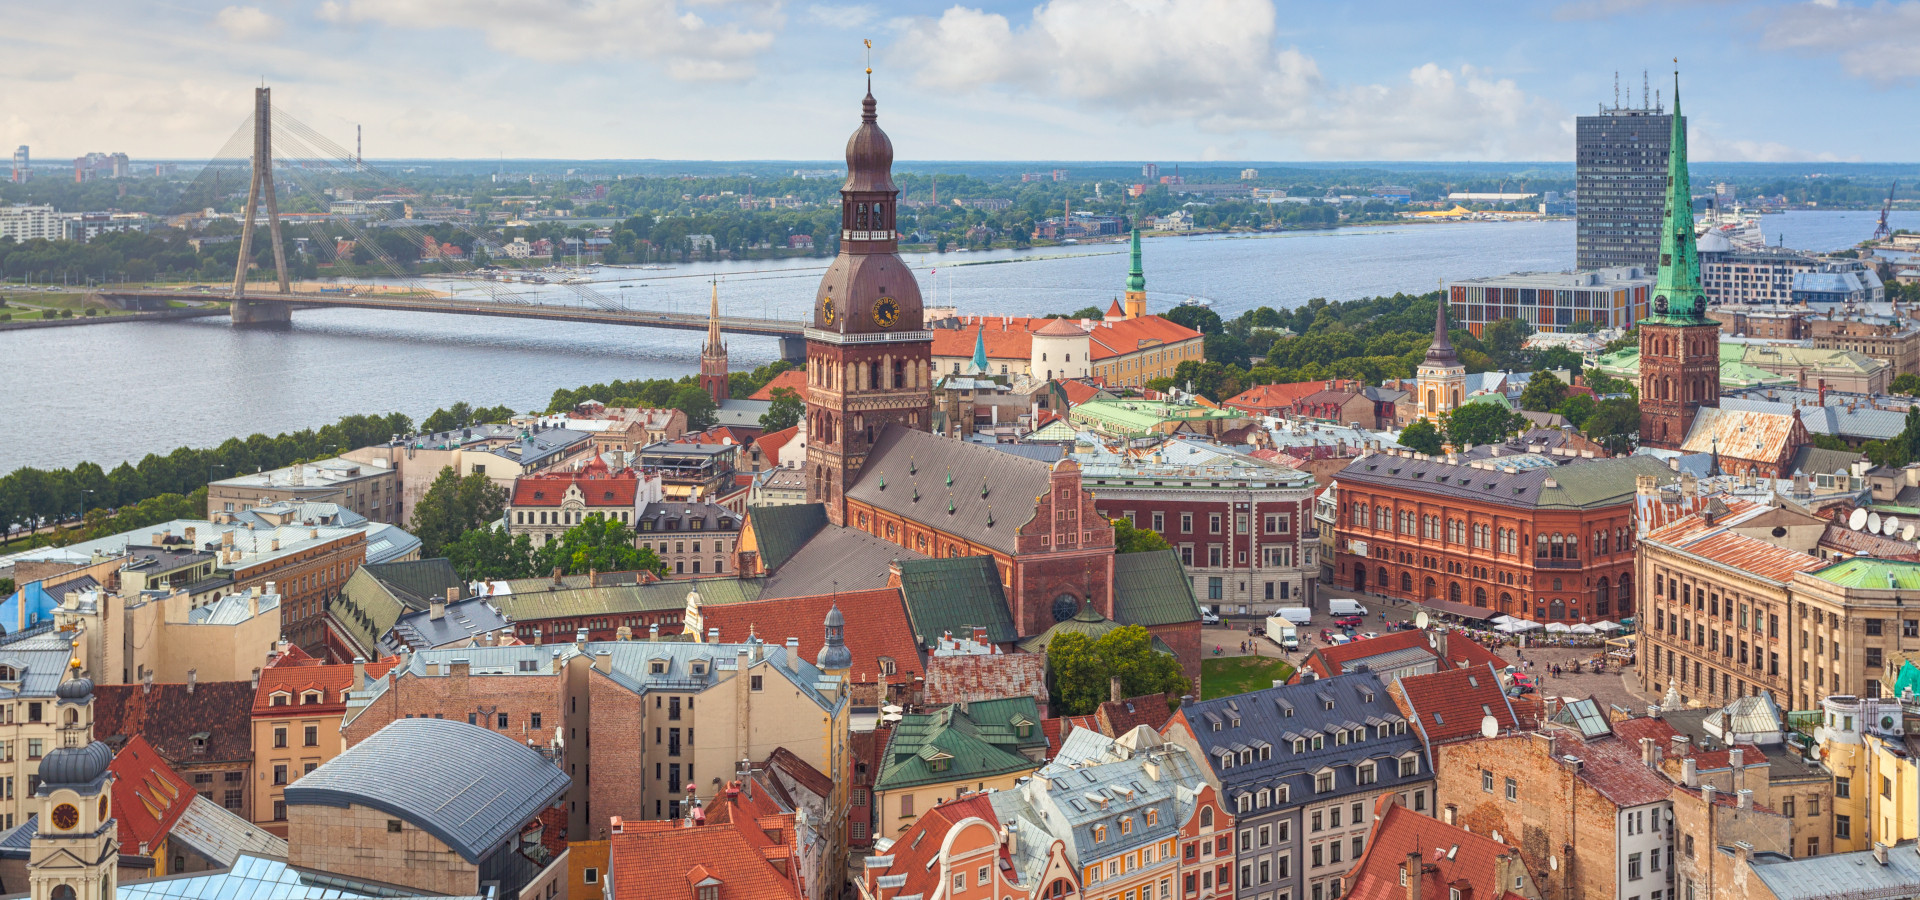 View over central Riga, Latvia, with Riga Cathedral and Daugava River in the background.